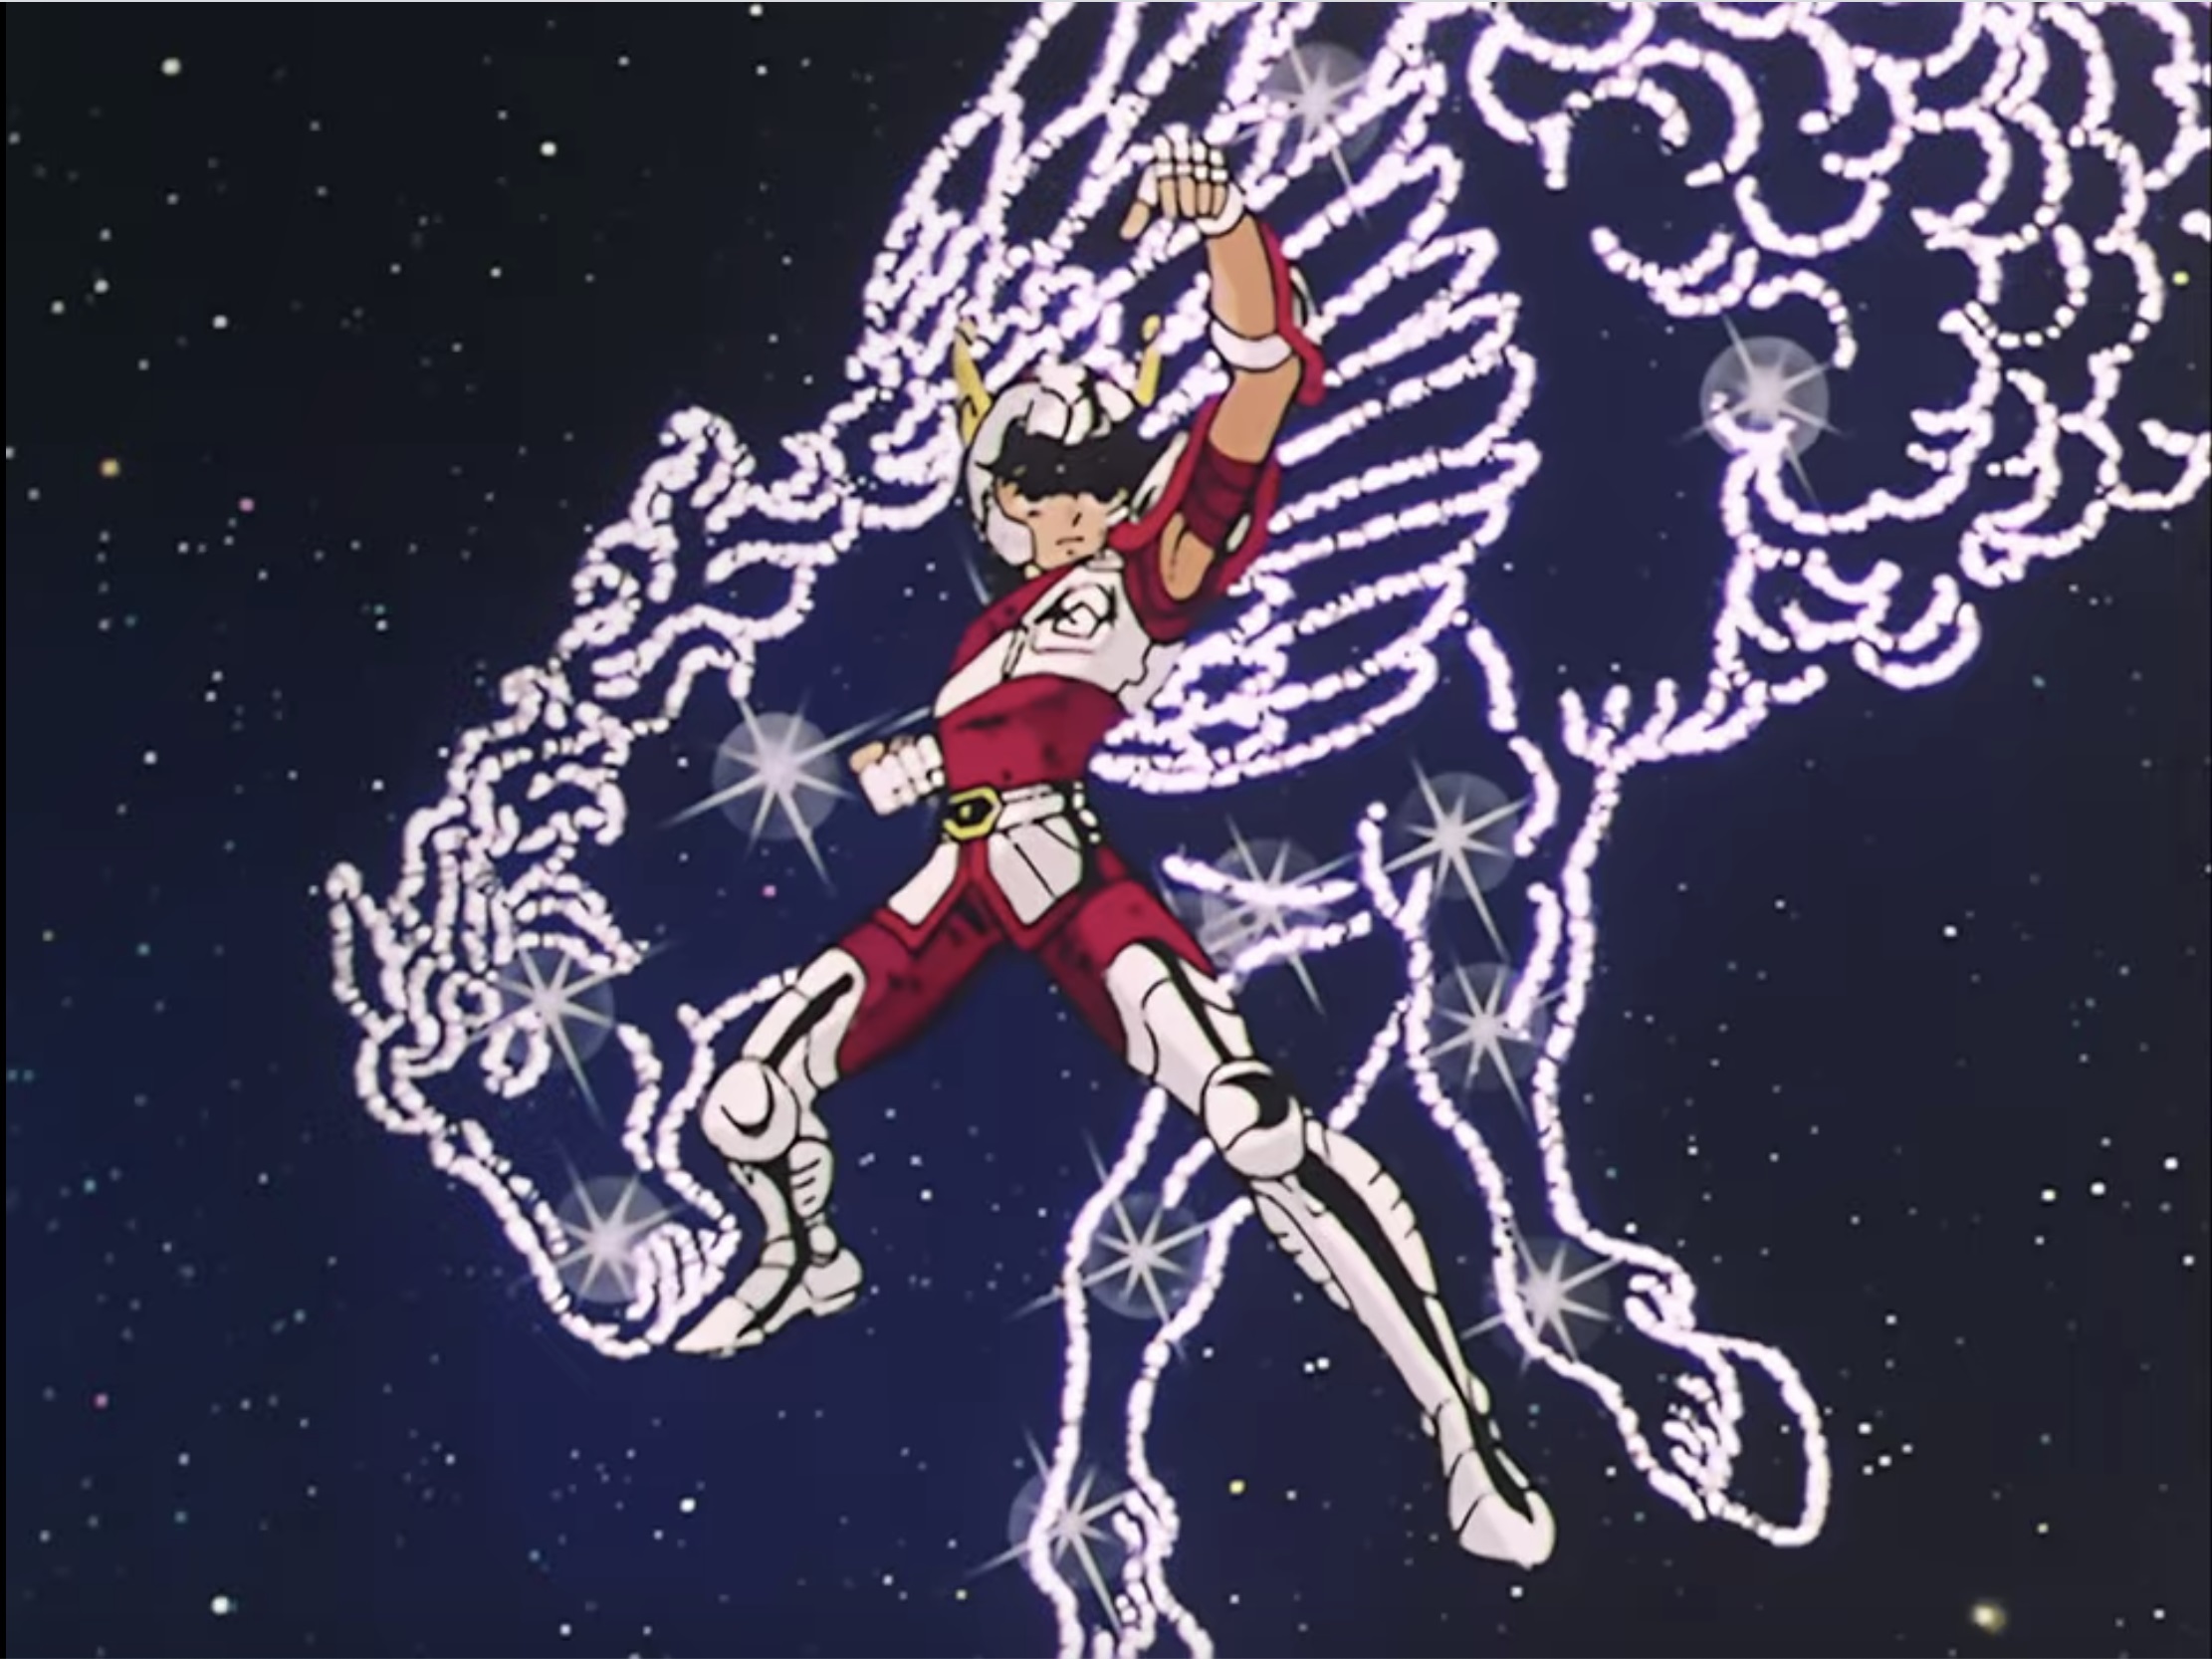 Seiya poses in front of a constellation of Pegasus in a scene from the 1986 --1989 Saint Seiya TV anime.